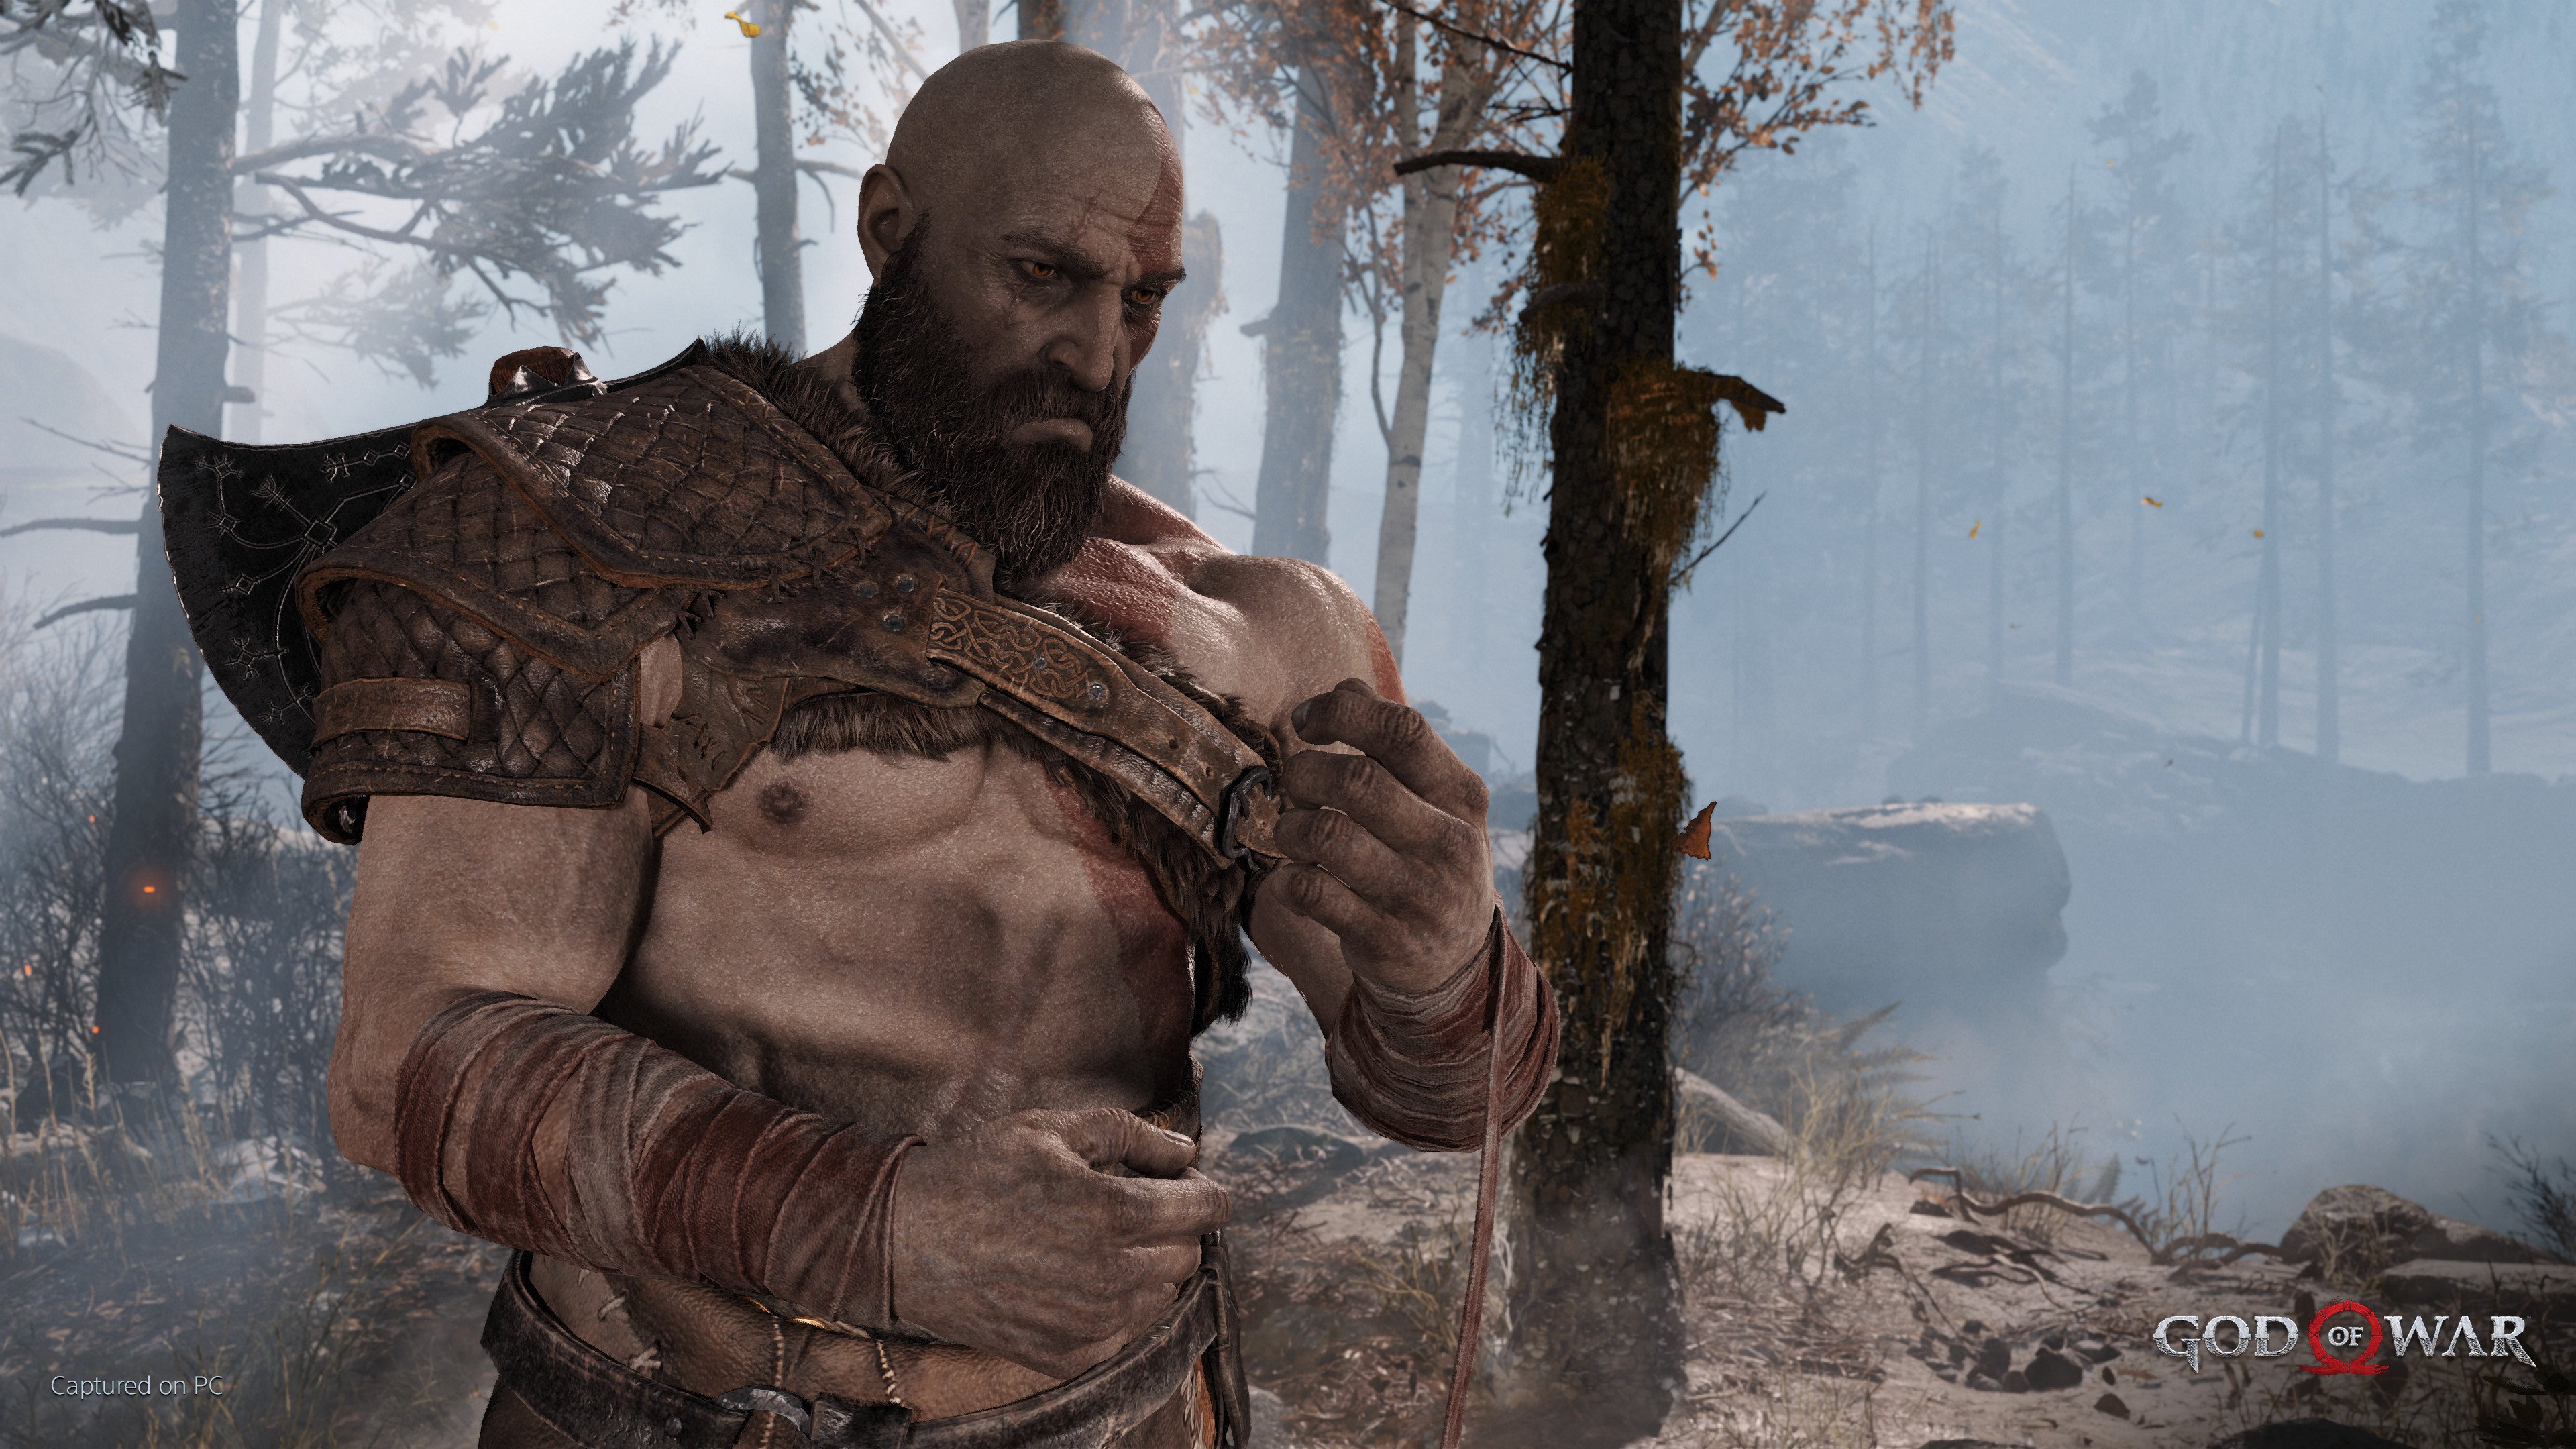 God of War (2018) coming to Steam, Epic on January 14, 2022